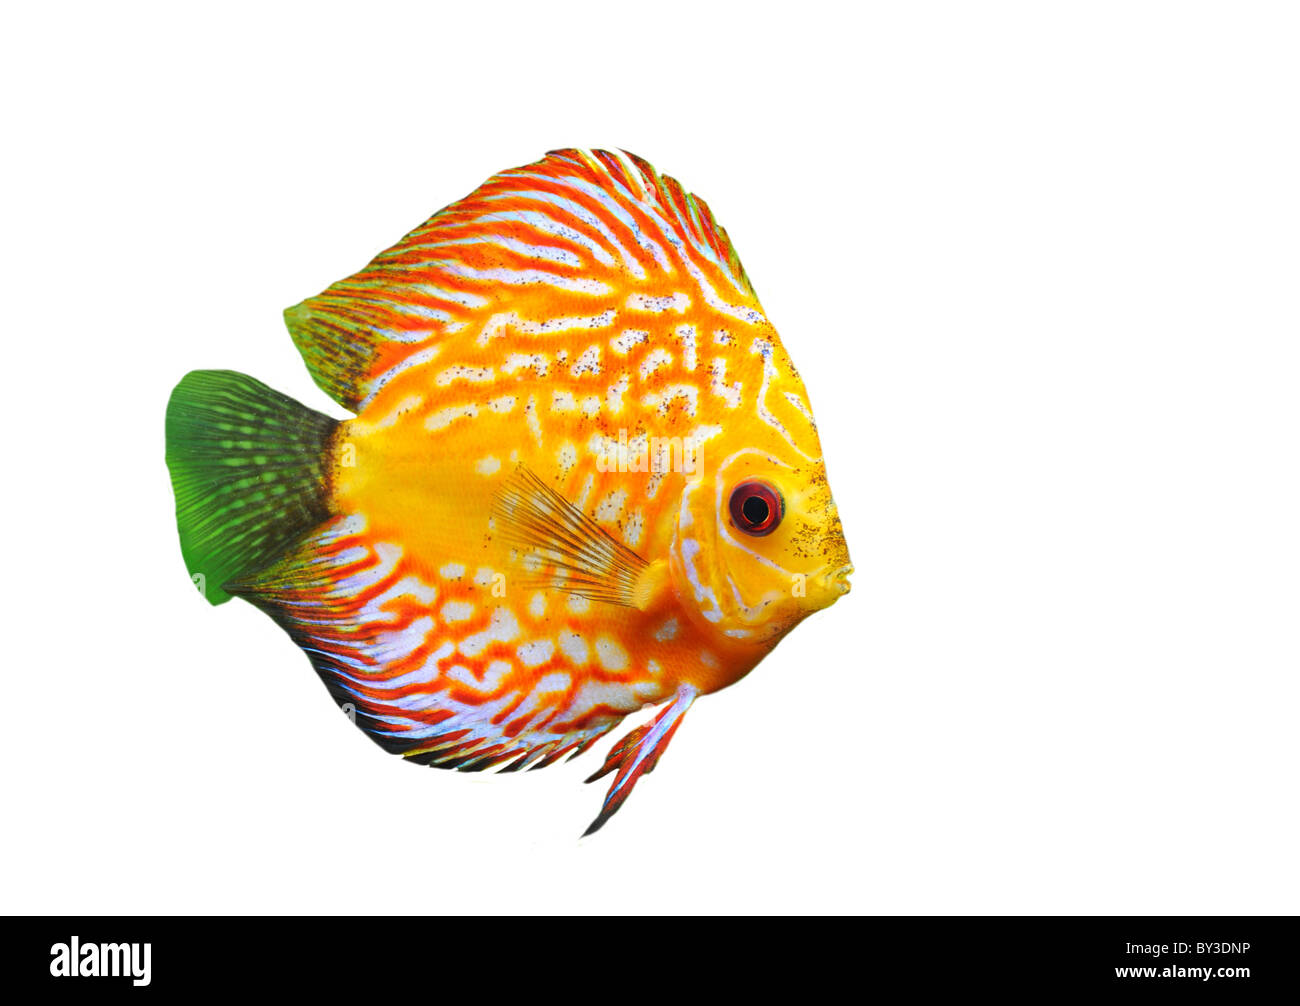 portrait of a red tropical Symphysodon discus fish in a white background Stock Photo